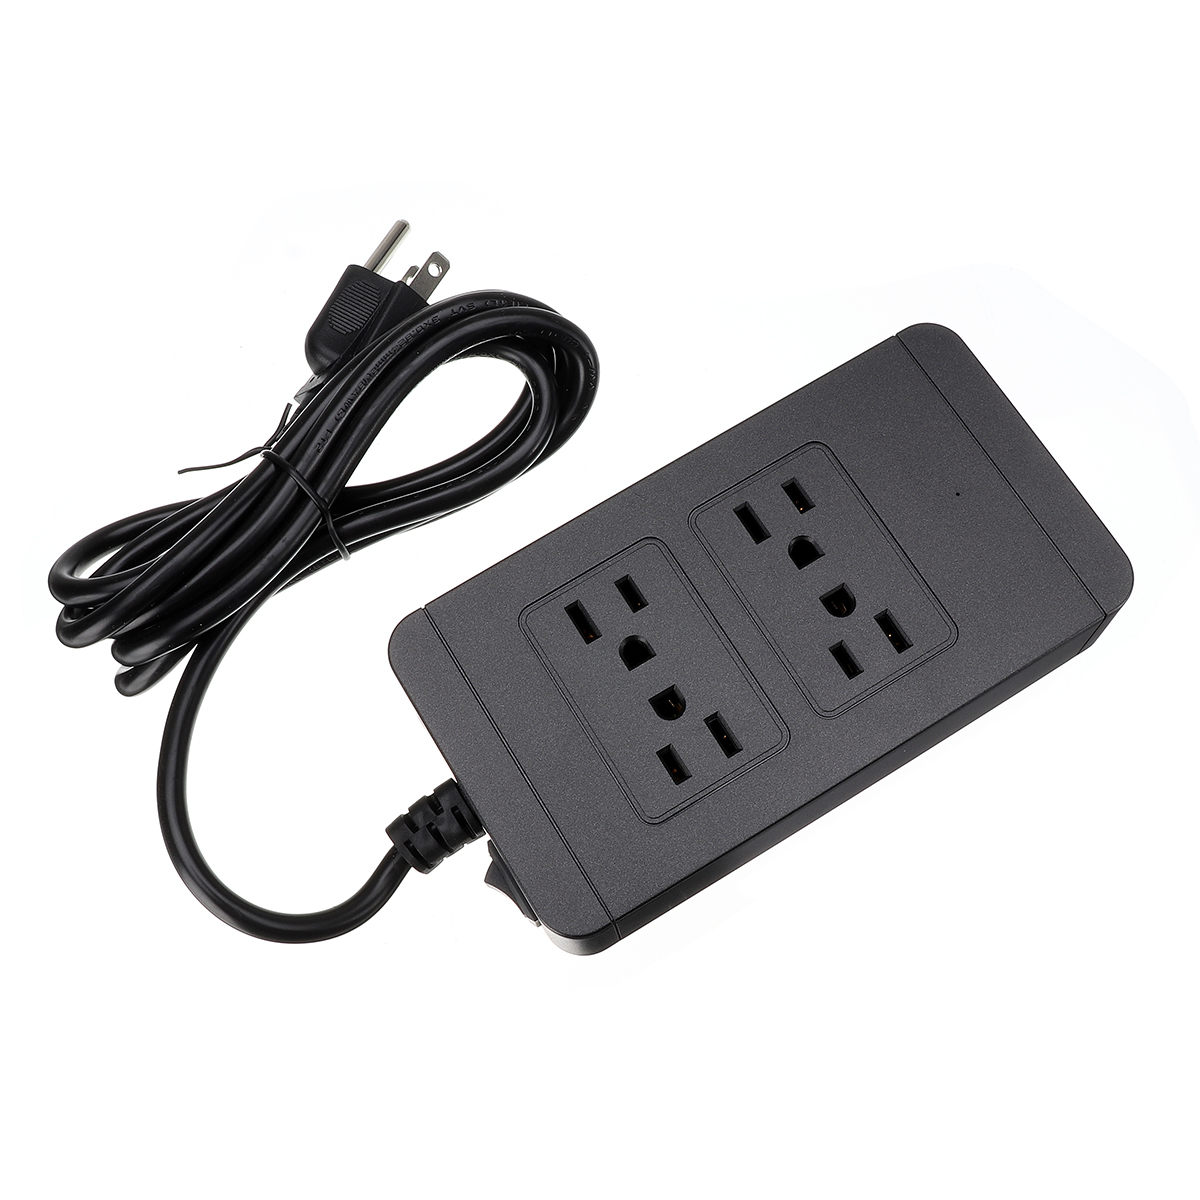 2500W-Power-Strip-Socket-4-AC-Outlets-4-USB-Ports-Charger-Smart-Power-Switch-Socket-US-1303091-8